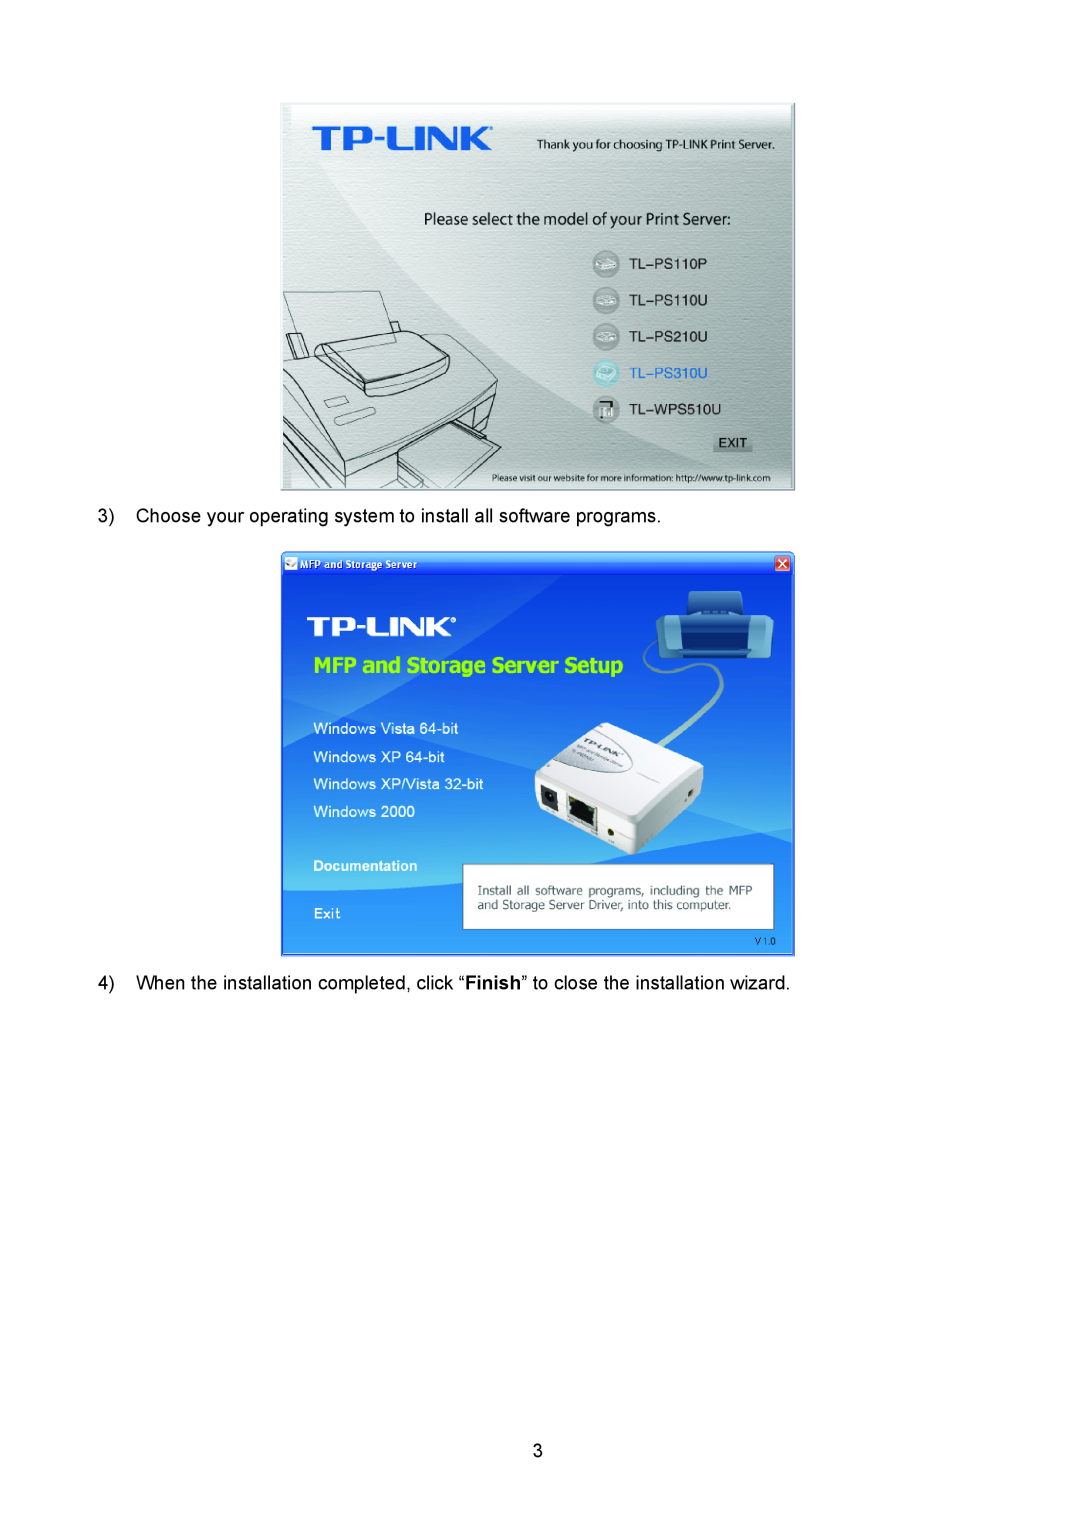 TP-Link TL-PS310U manual Choose your operating system to install all software programs 